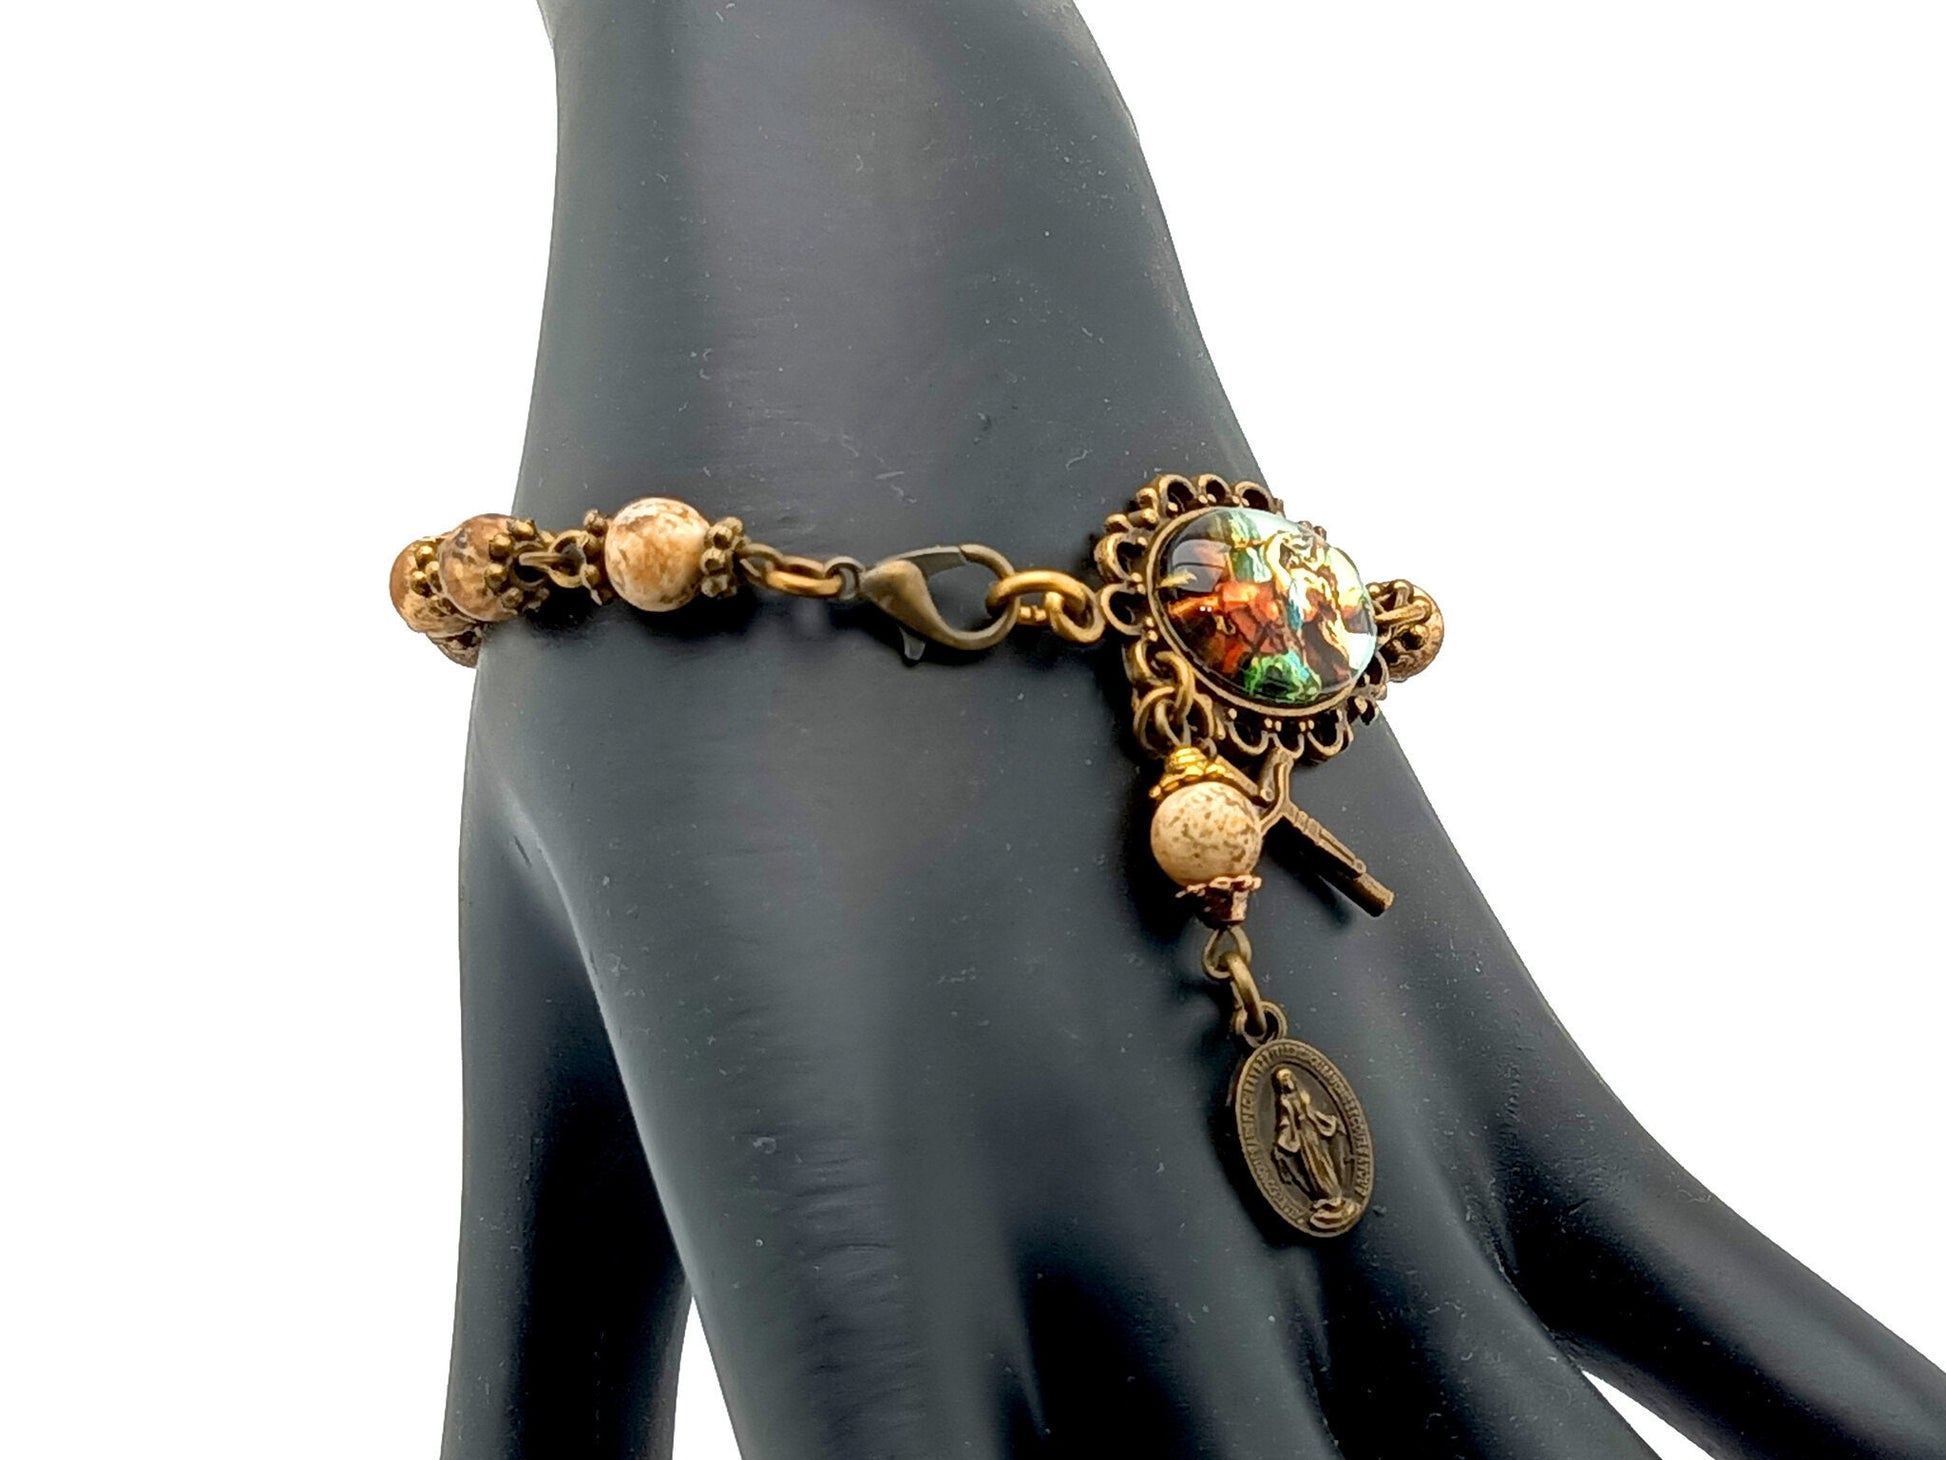 Saint Michael unique rosary beads single decade bracelet with agate gemstone beads, bronze crucifix, Miraculous medal and picture centre medal.